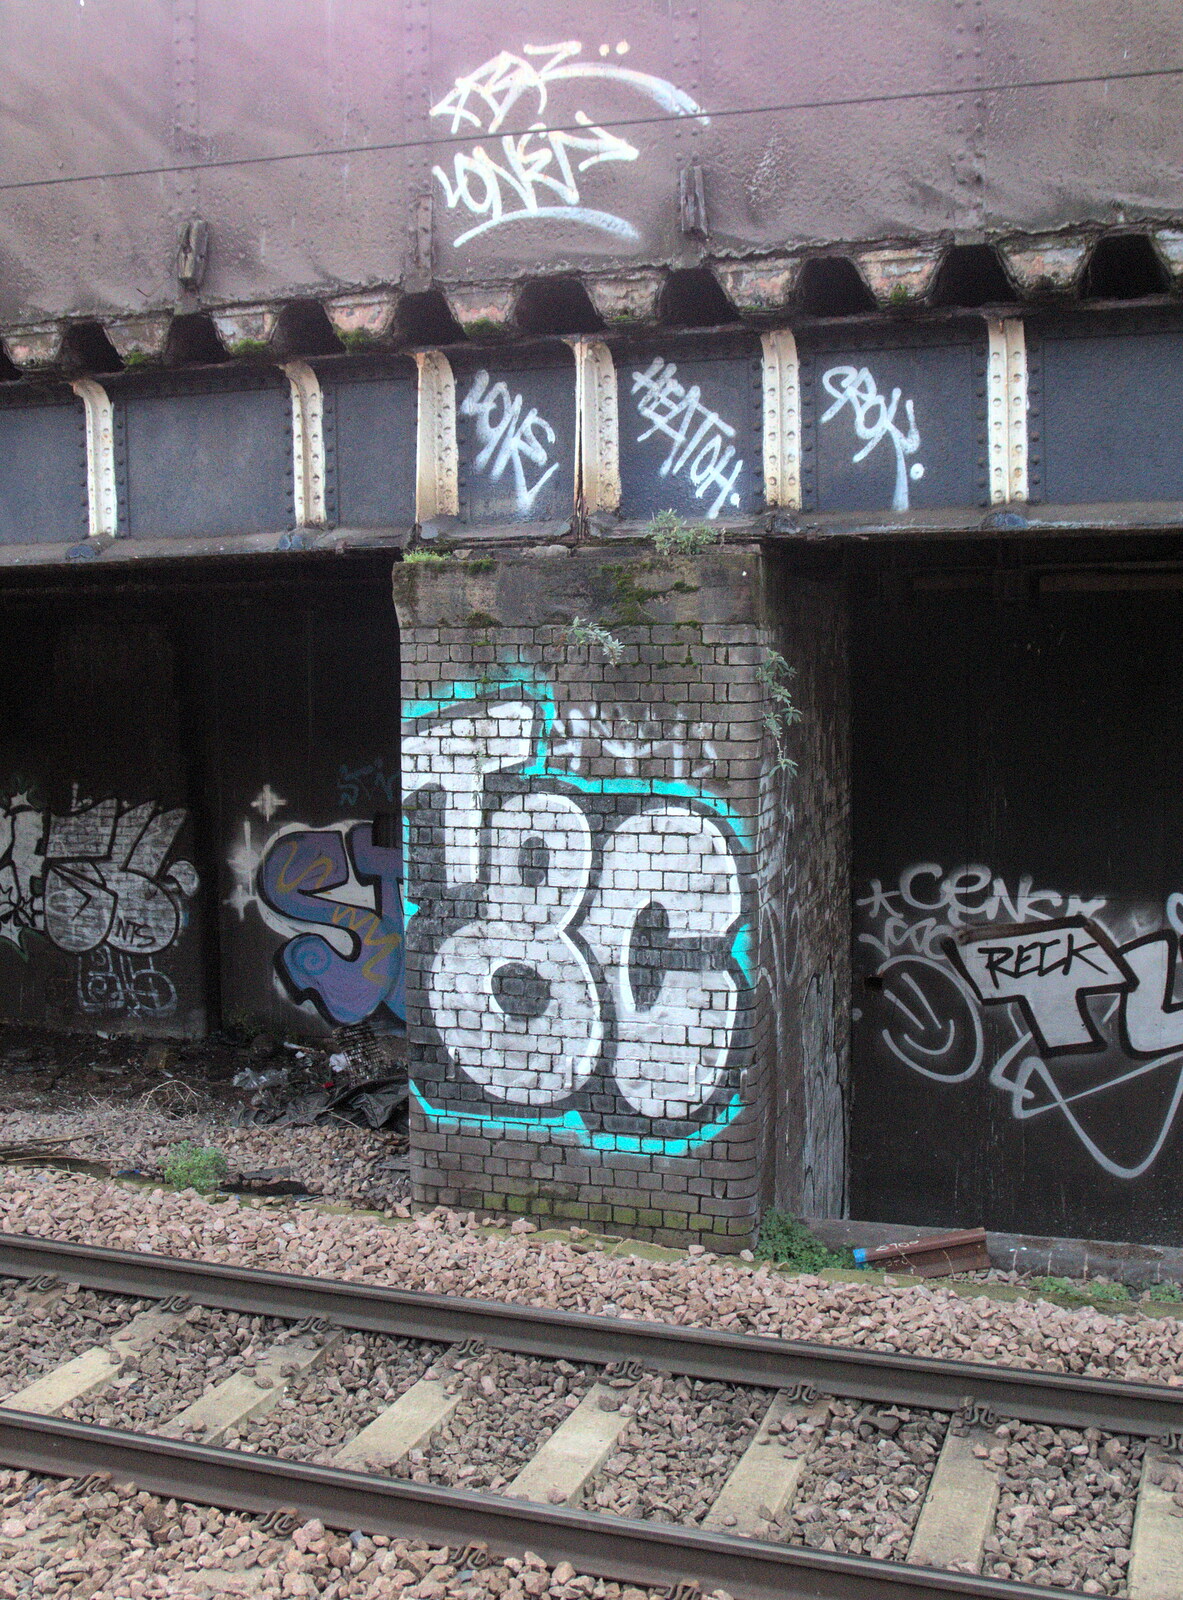 Another T8C tag from Railway Graffiti, Tower Hamlets, London - 12th February 2019